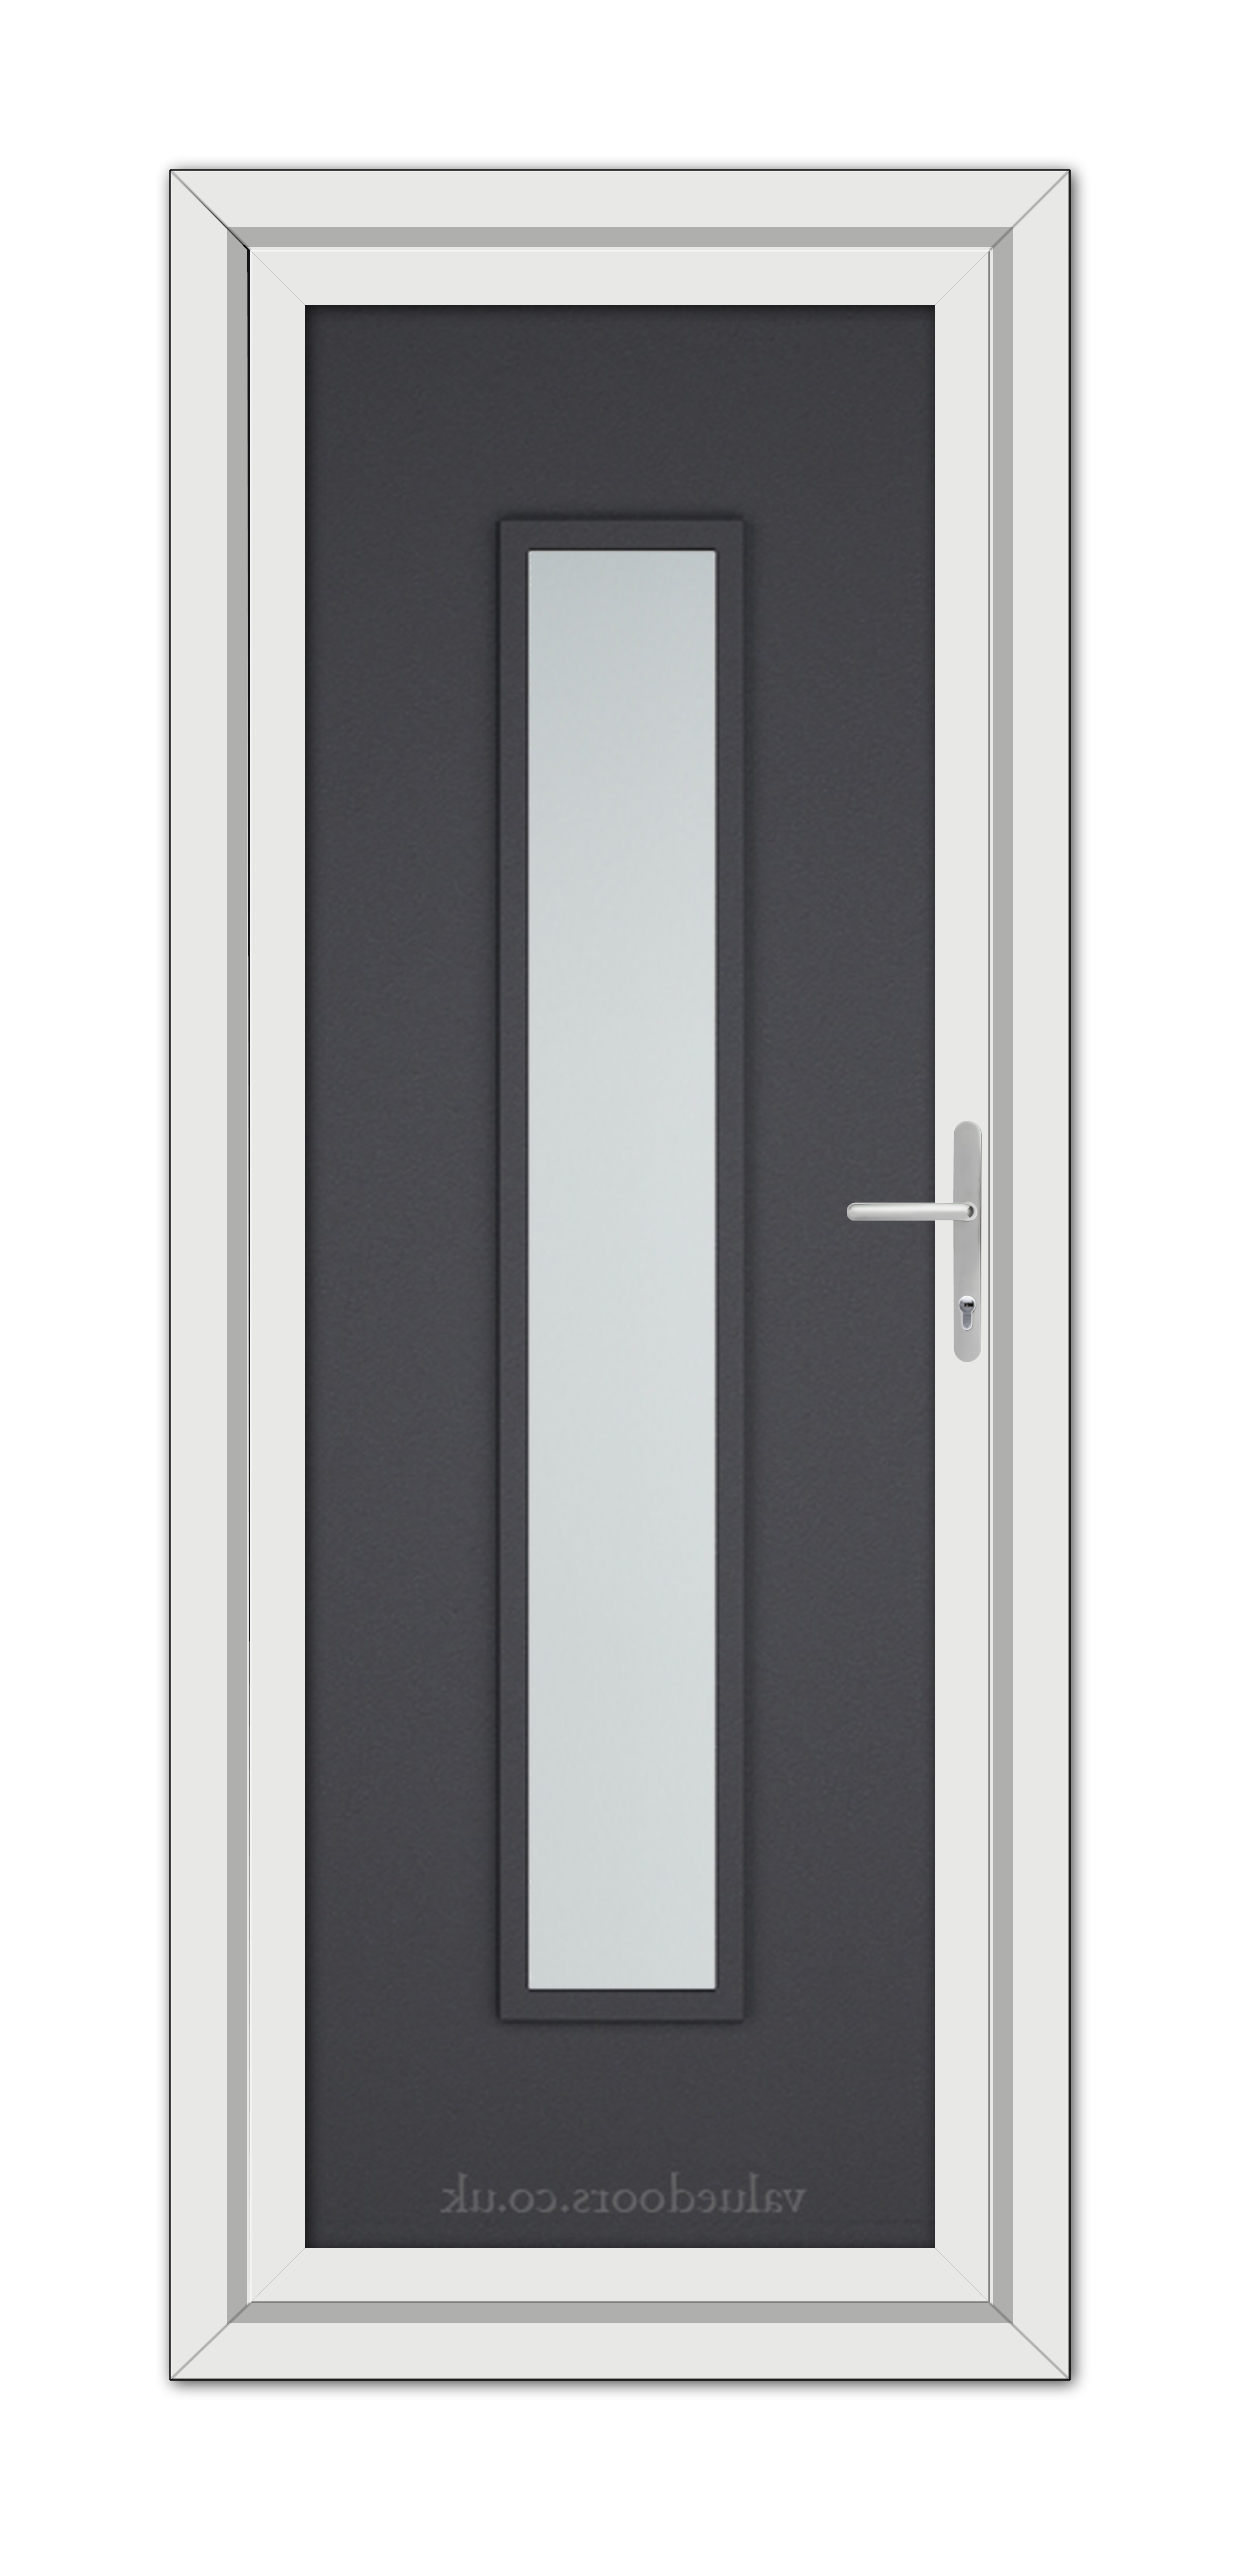 A modern, Grey Grained Modern 5101 uPVC Door with a slim, central glass panel, framed by dark gray and white borders, featuring a metallic handle on the right.